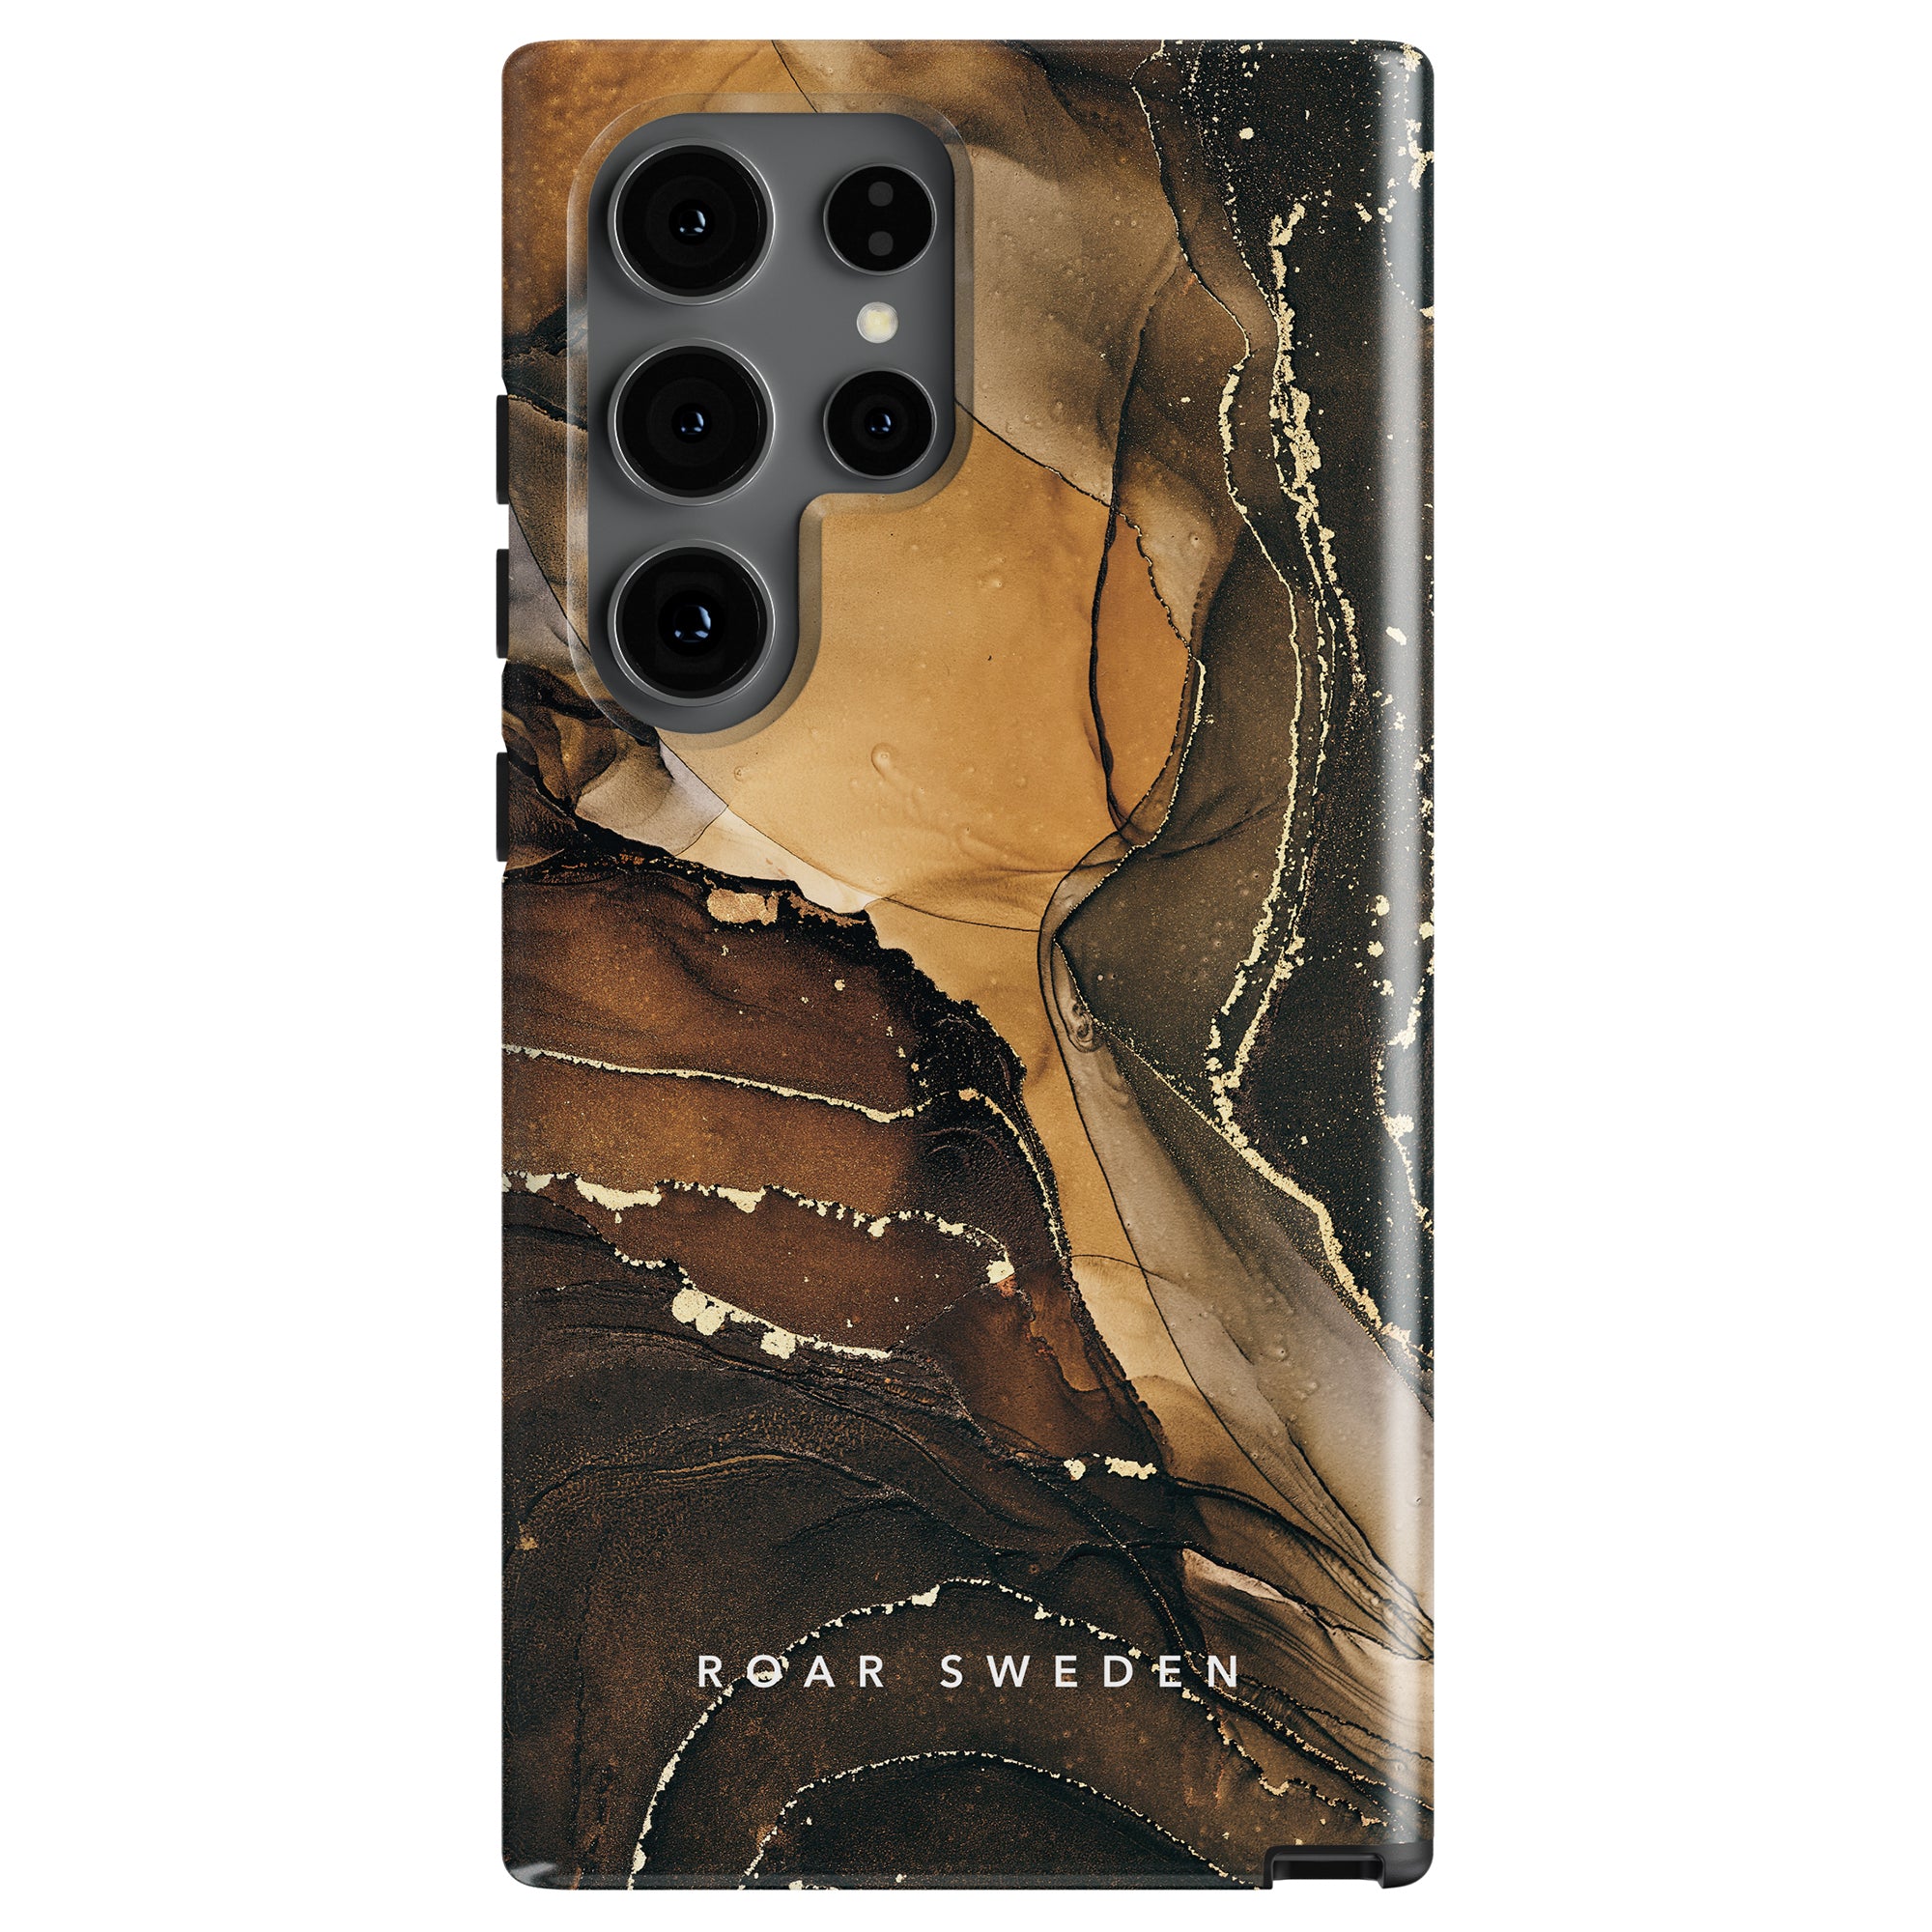 Royal Marble - Tough case with an abstract, lyxigt marmormönster in shades of black, brown, and beige featuring the brand name "ROAR SWEDEN" at the bottom.